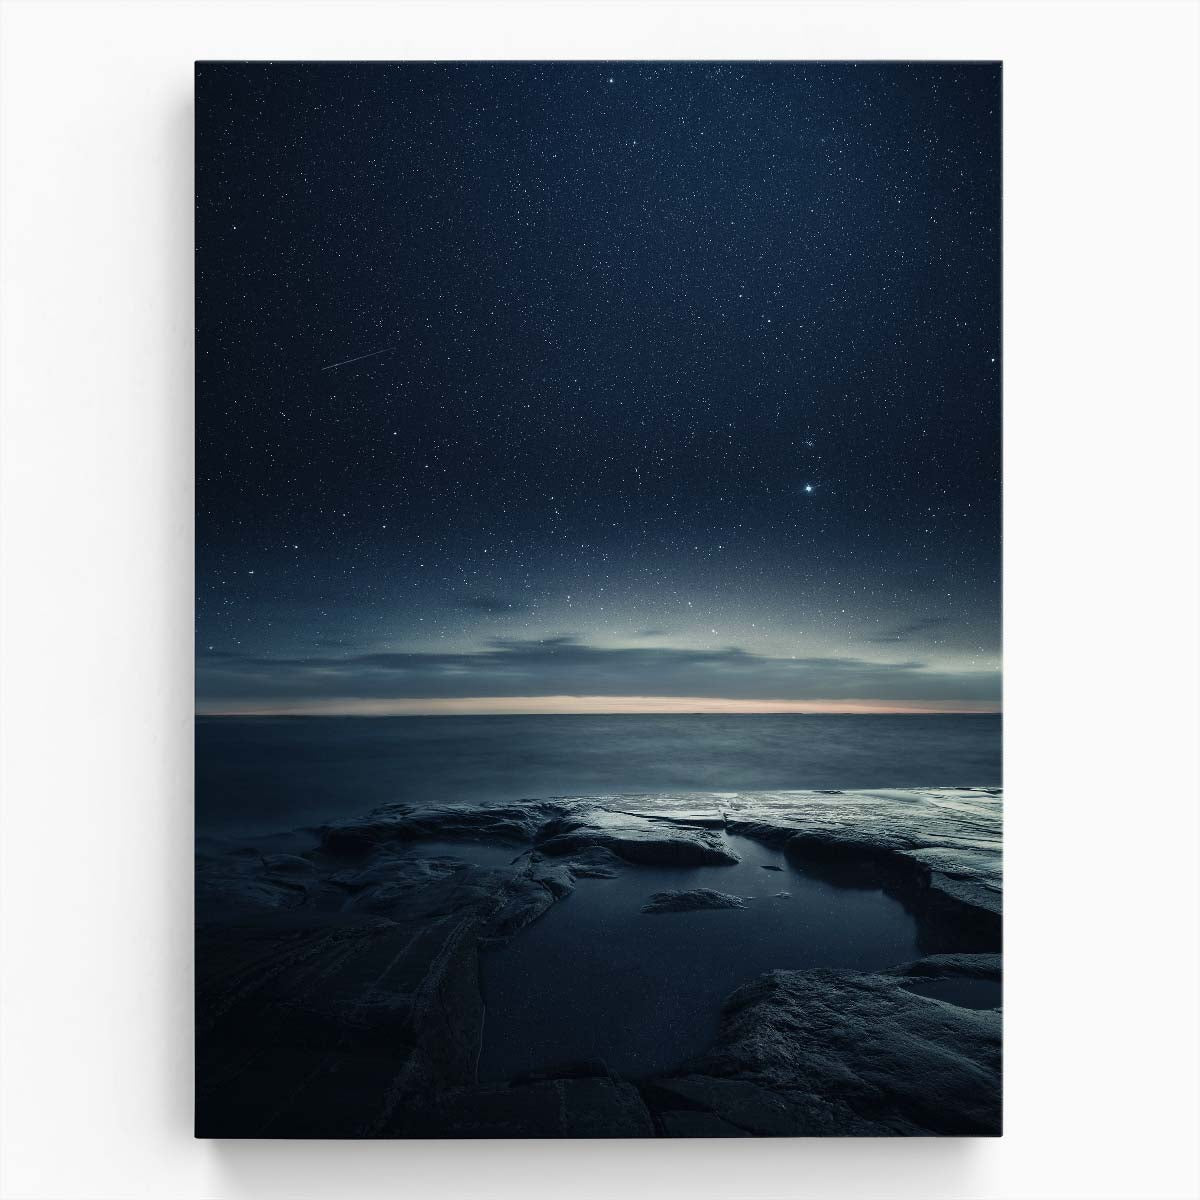 Mika Suutari's Starry Night Sea Landscape Photography Art by Luxuriance Designs, made in USA